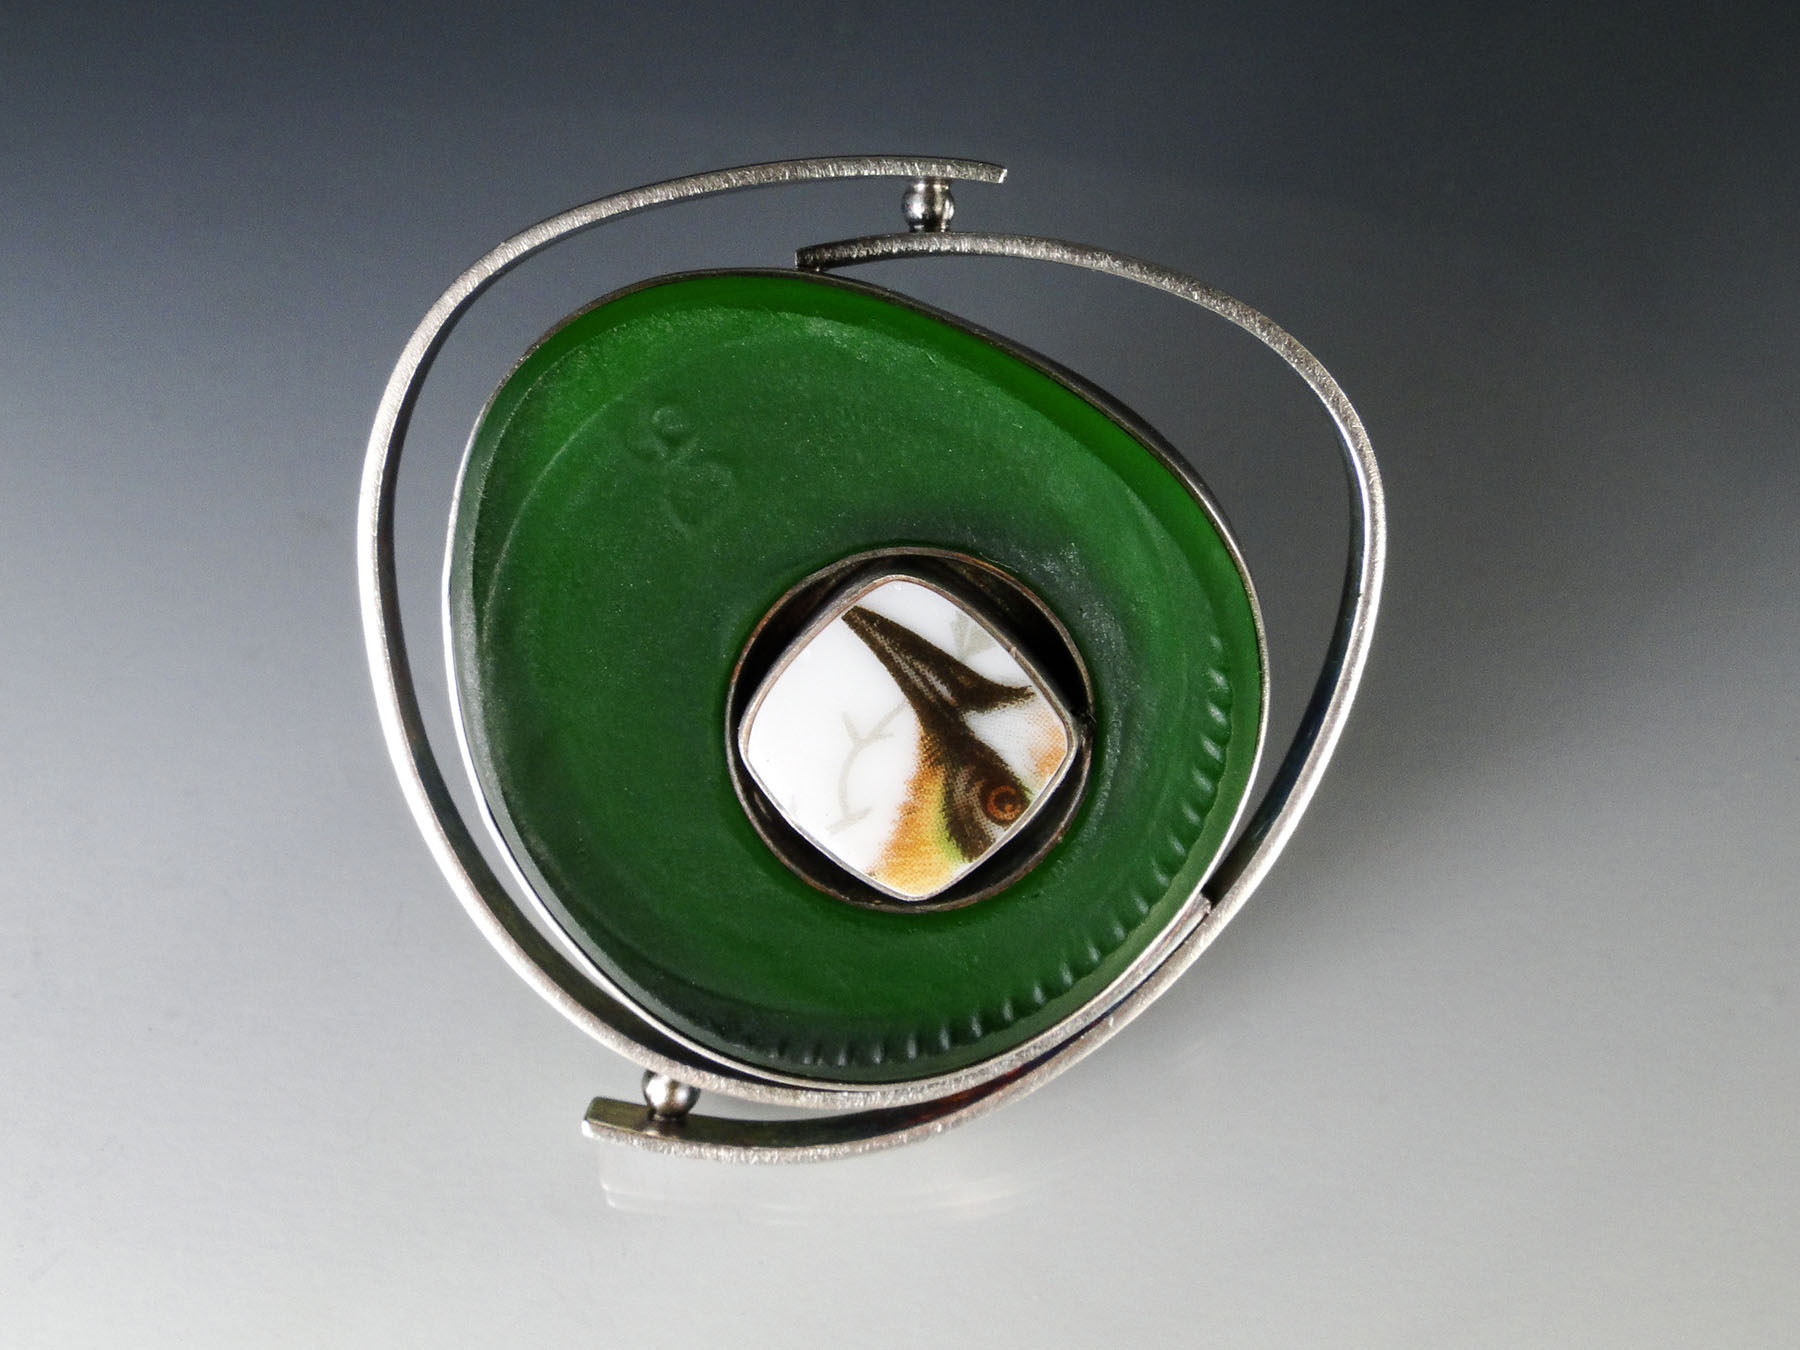 Amy Faust, Green Peekaboo Pin (2017). Repurposed glass and porcelain, recycled sterling silver. Dimensions: 2.5” x 2.5”. ©Amy Faust 2017. Courtesy of the artist.